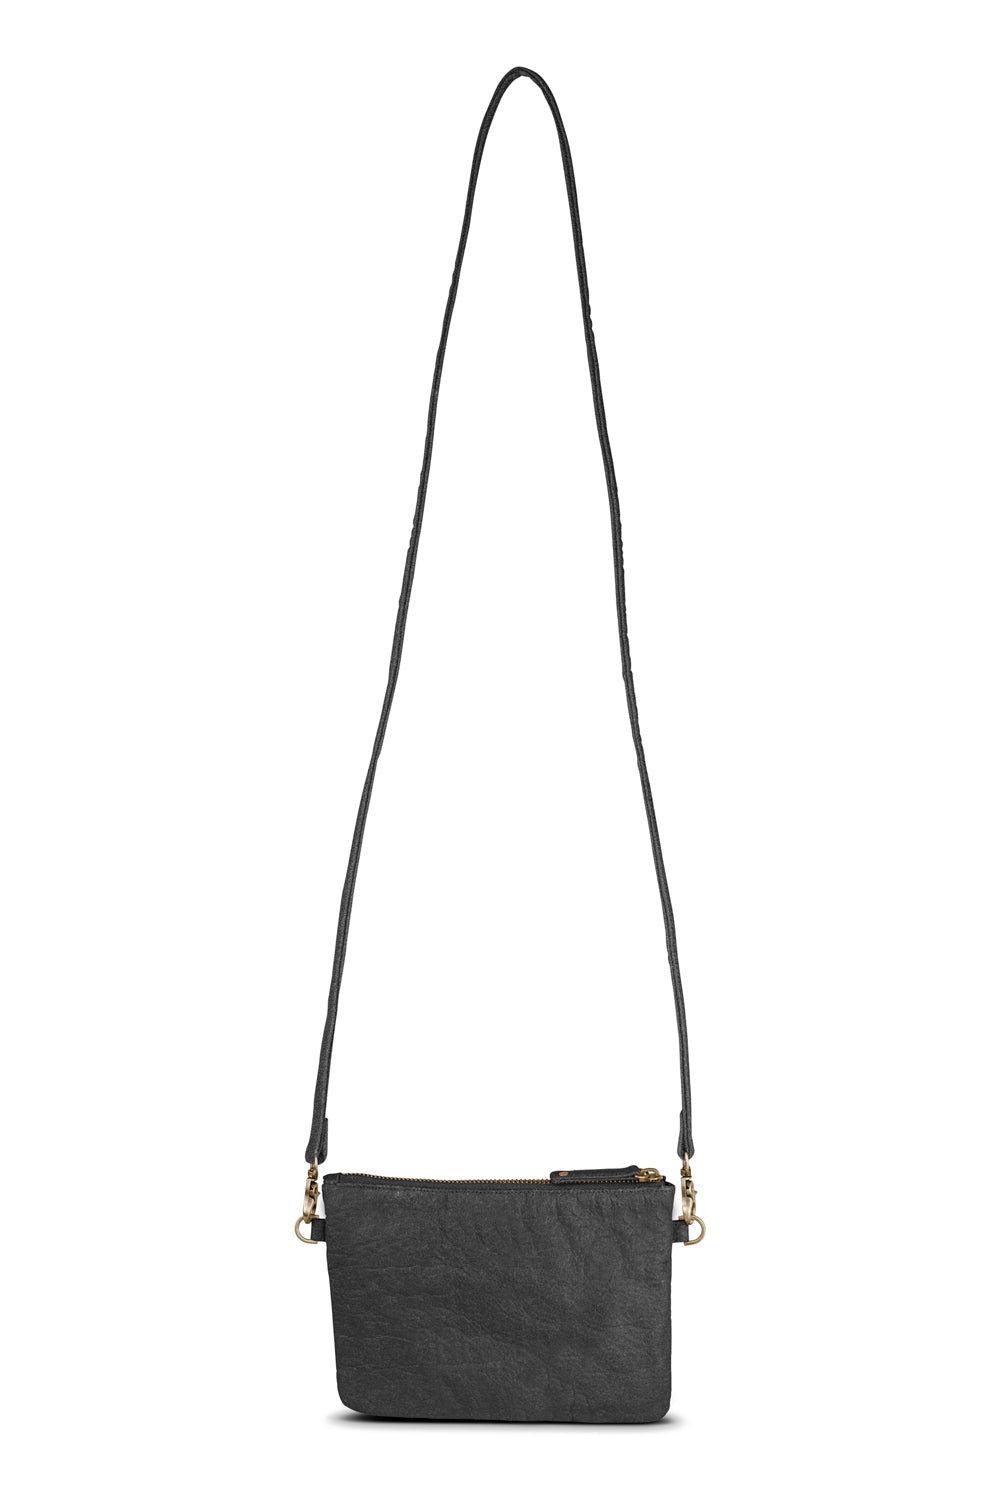 Crossbody Clutch | Piñatex Pineapple Leather Charcoal